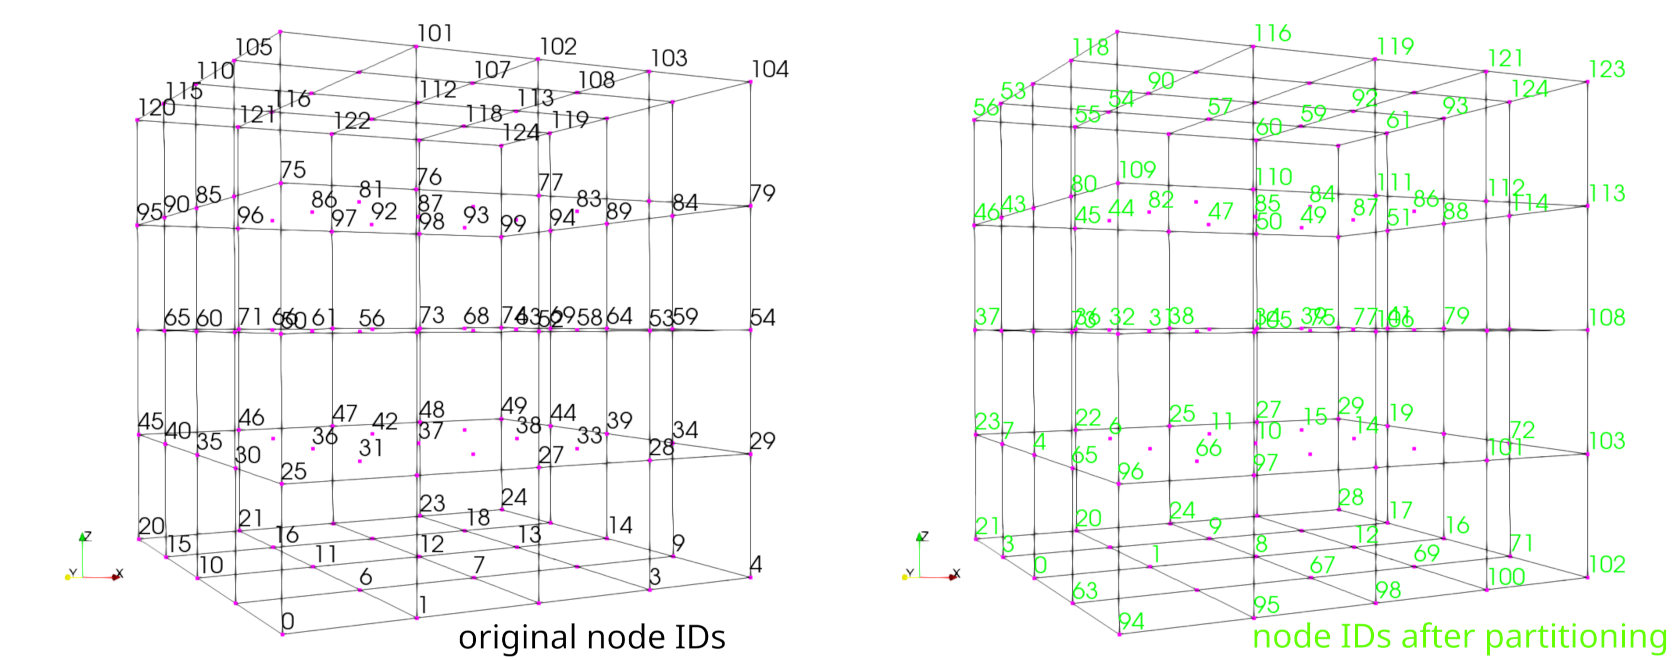 Node IDs in the bulk mesh for the serial simulation